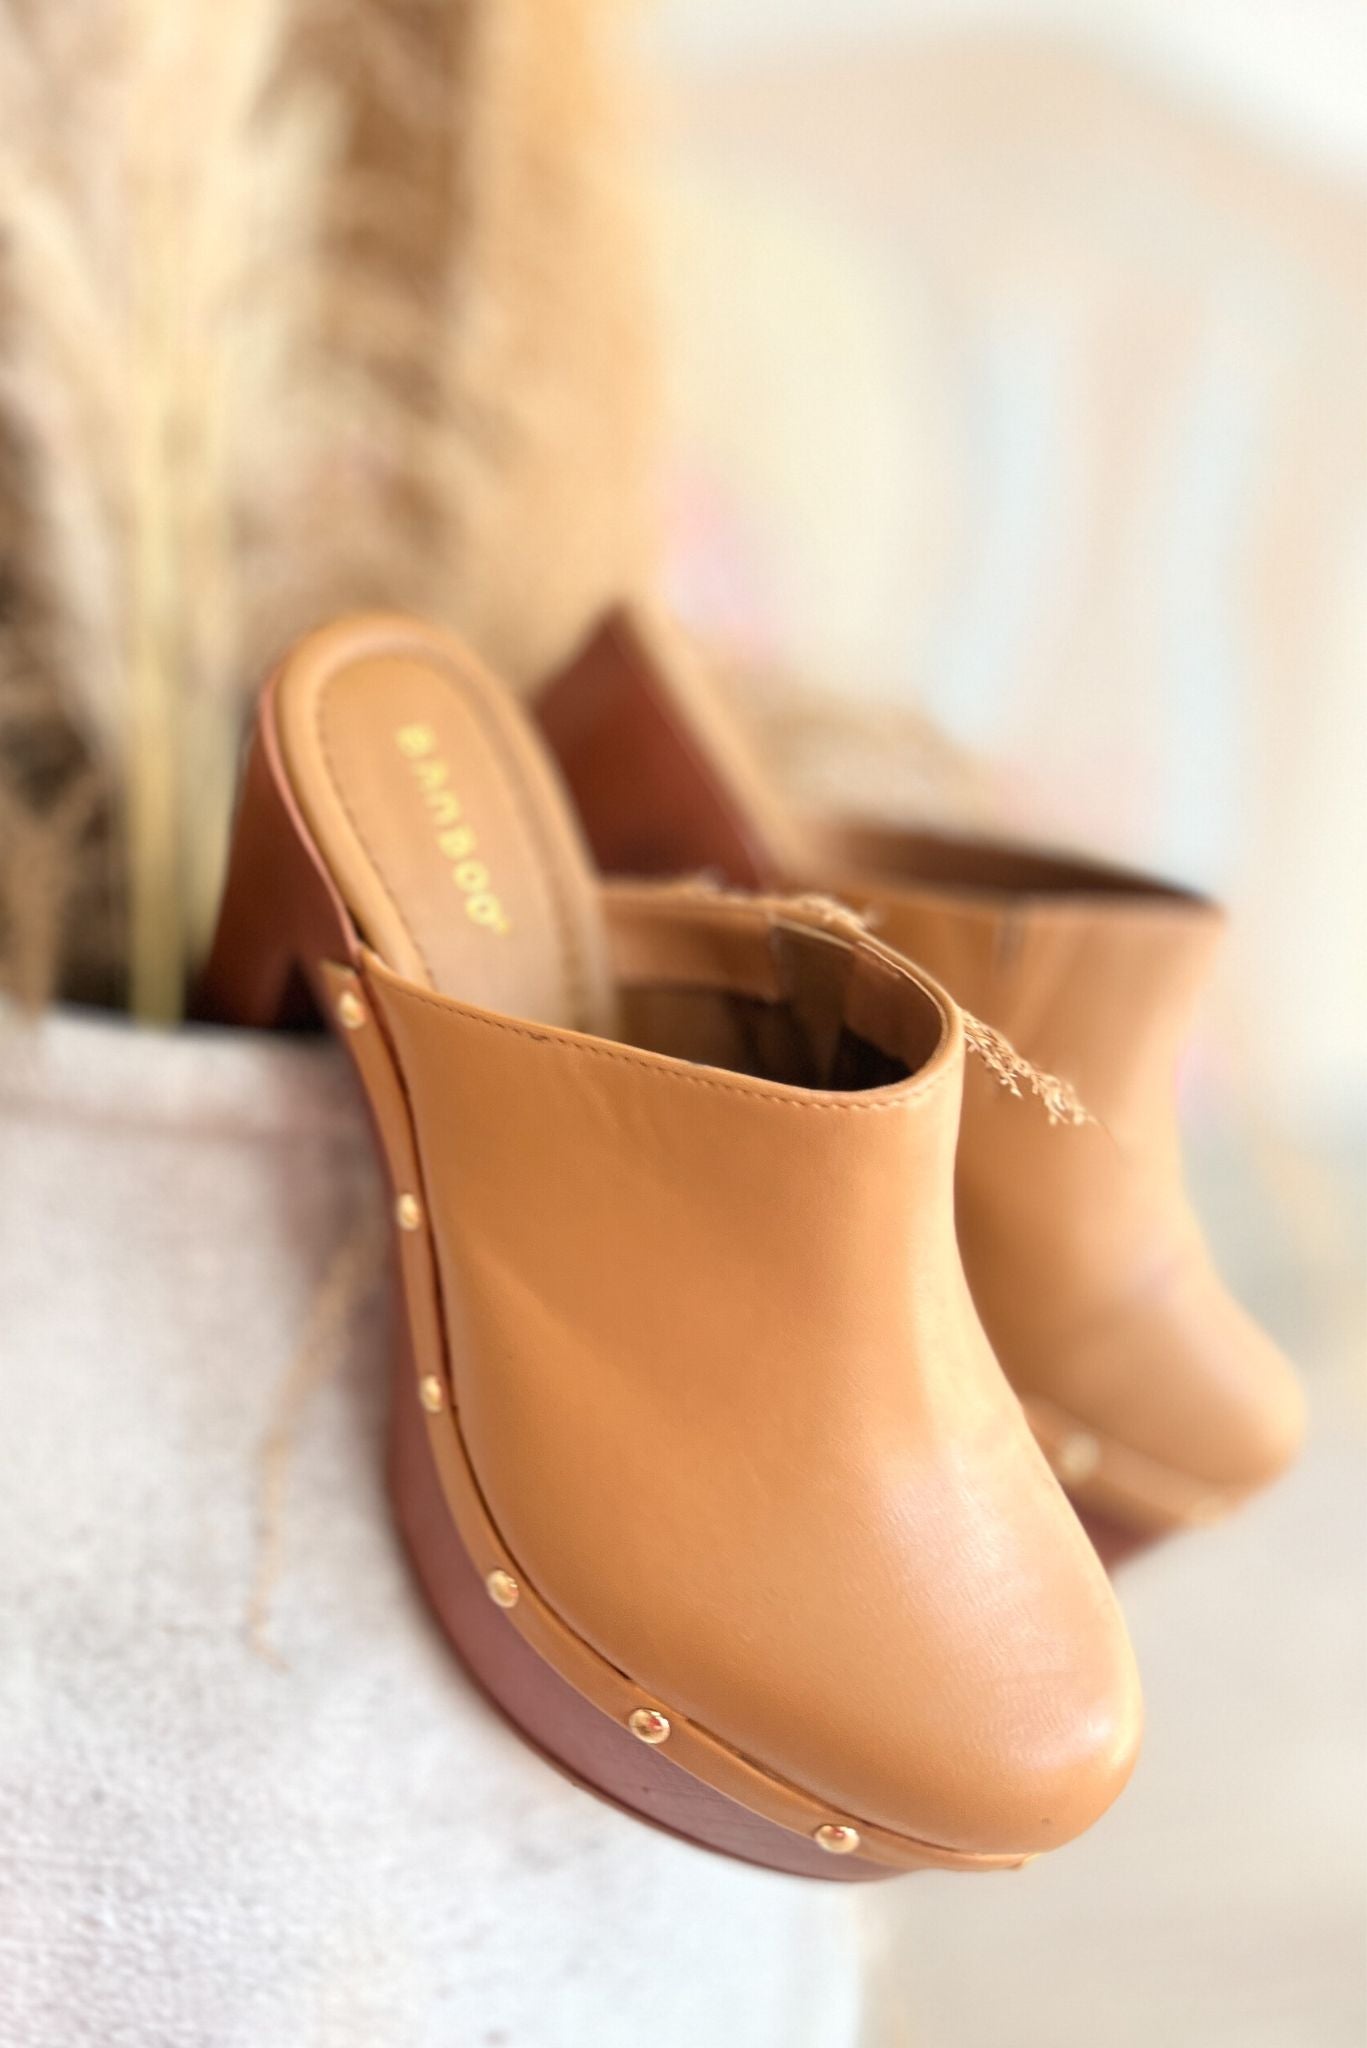 Load image into Gallery viewer, Tan Platform Gold Studded Mules *FINAL SALE*
